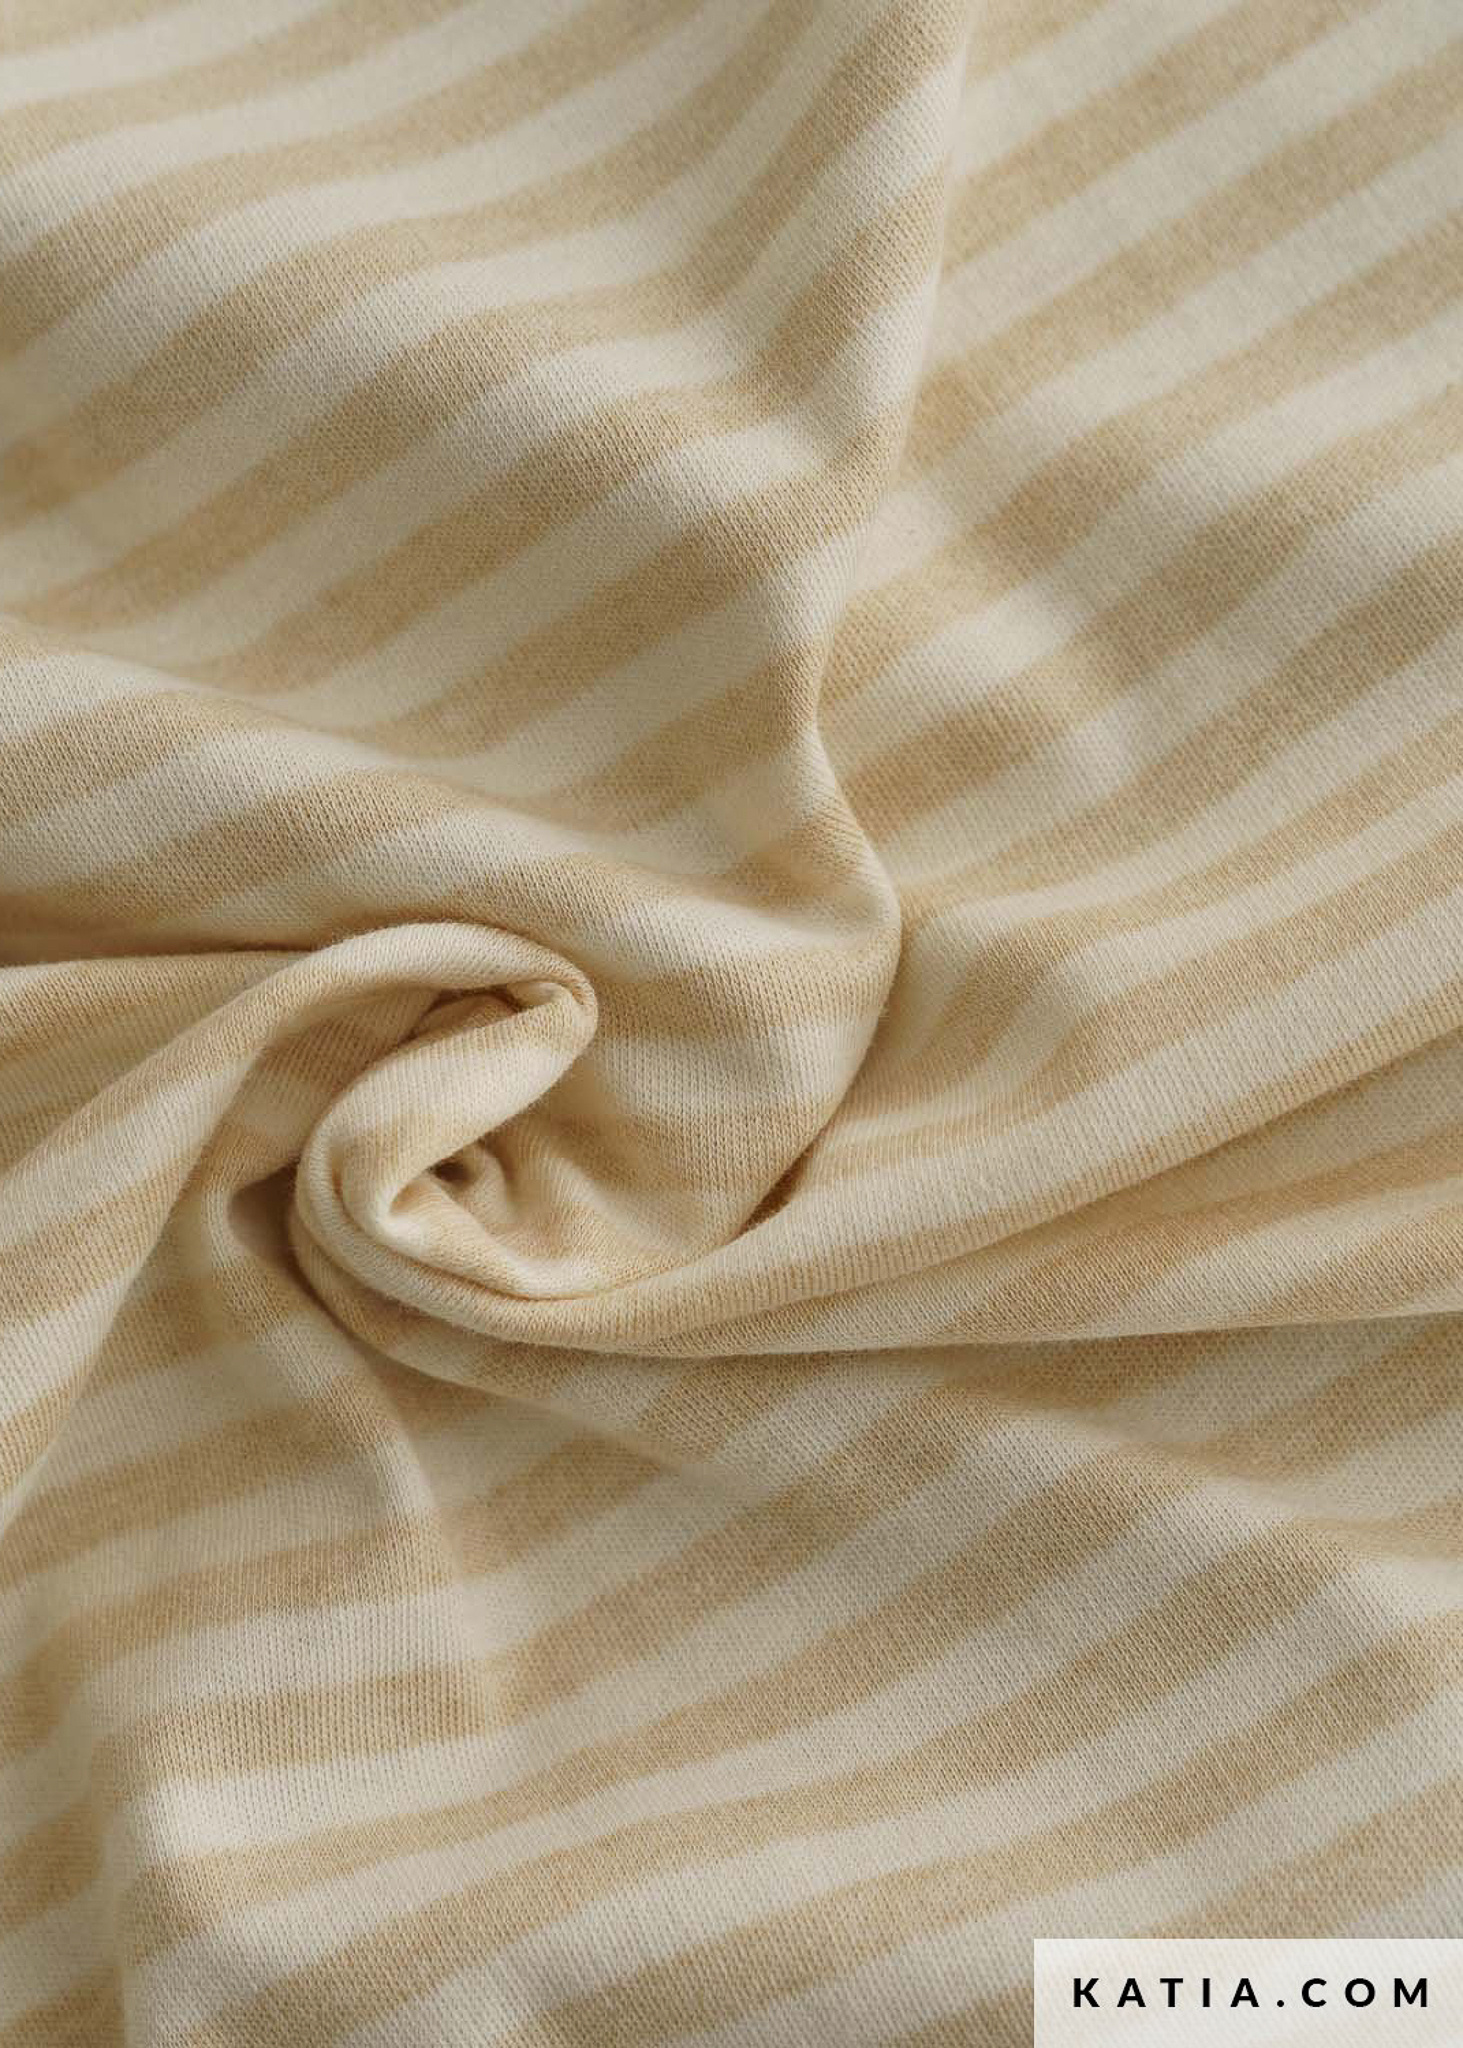 Natural Organic Cotton Jersey Fabric - 200 GSM - Grown in the USA